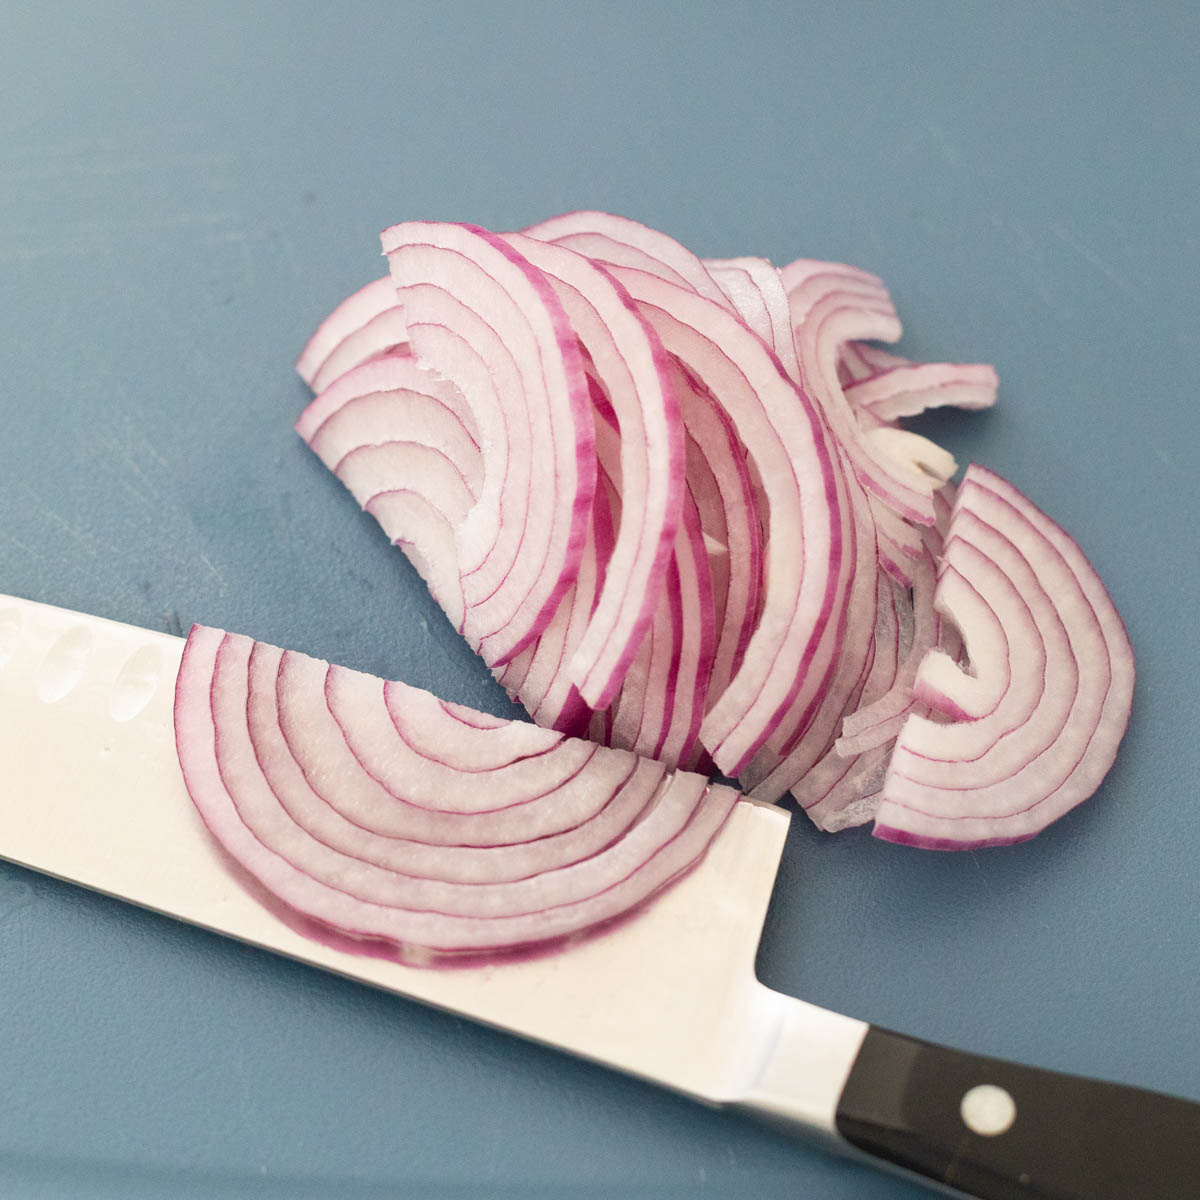 The red onion has been cut in half and then sliced very thinly.